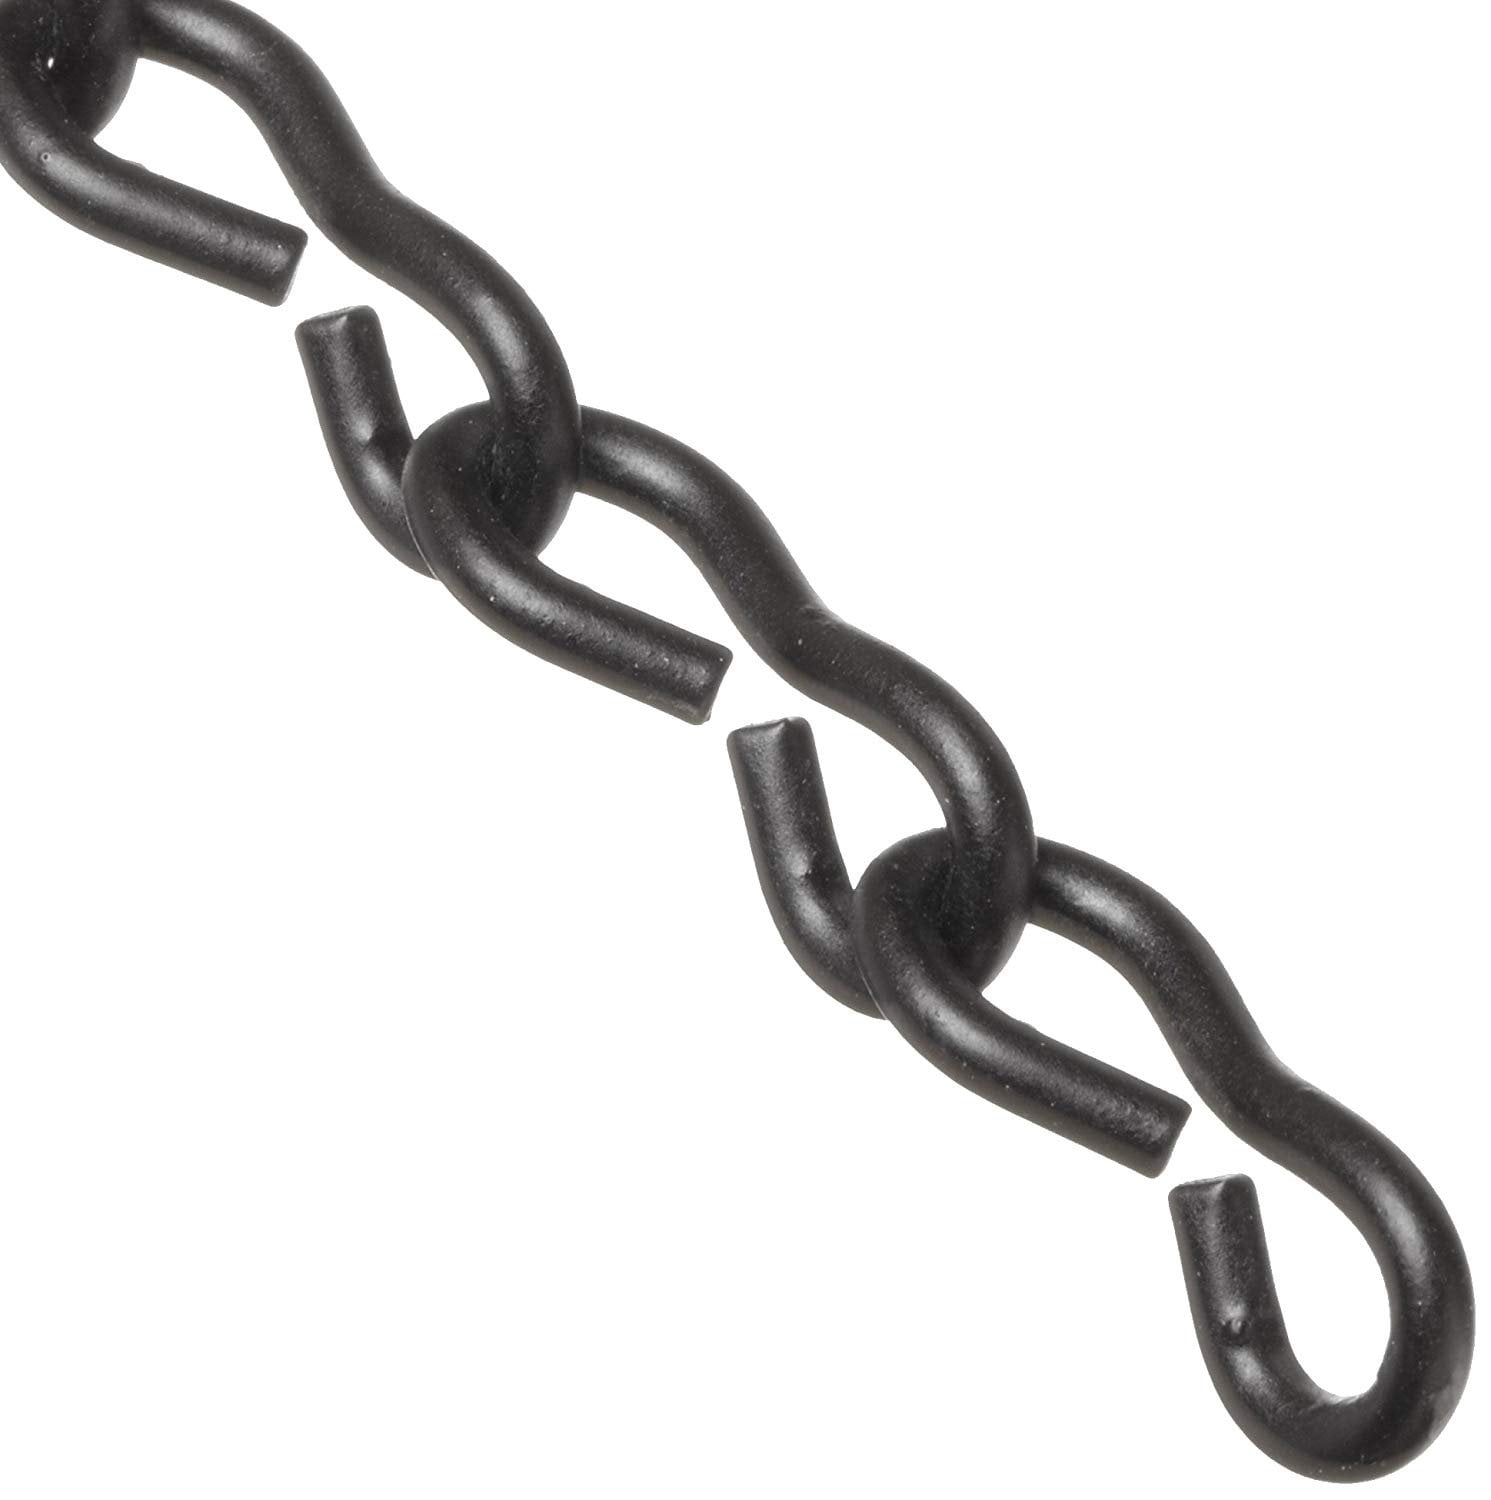 Jack Chain #14 x 190 ft Light Duty Single Twisted Steel with Black Finish New 